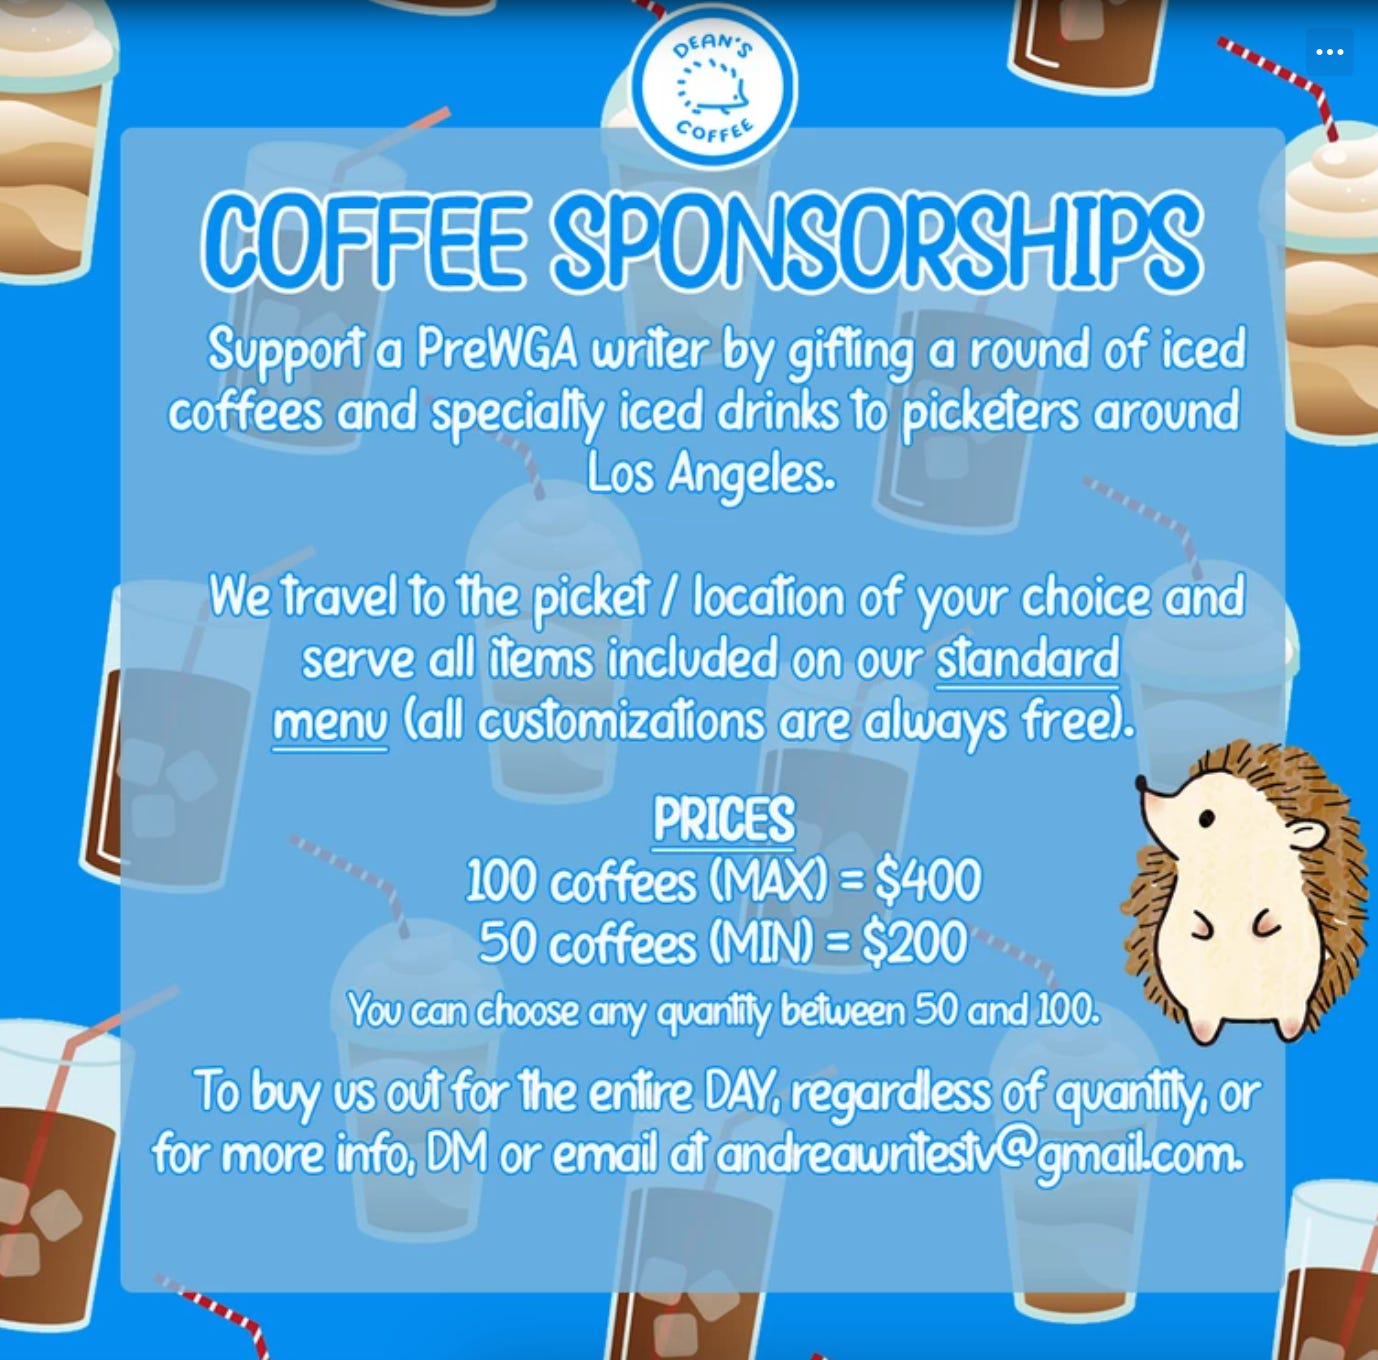 A flyer detailing opportunities to sponsor a coffee pop-up for WGA picket lines.